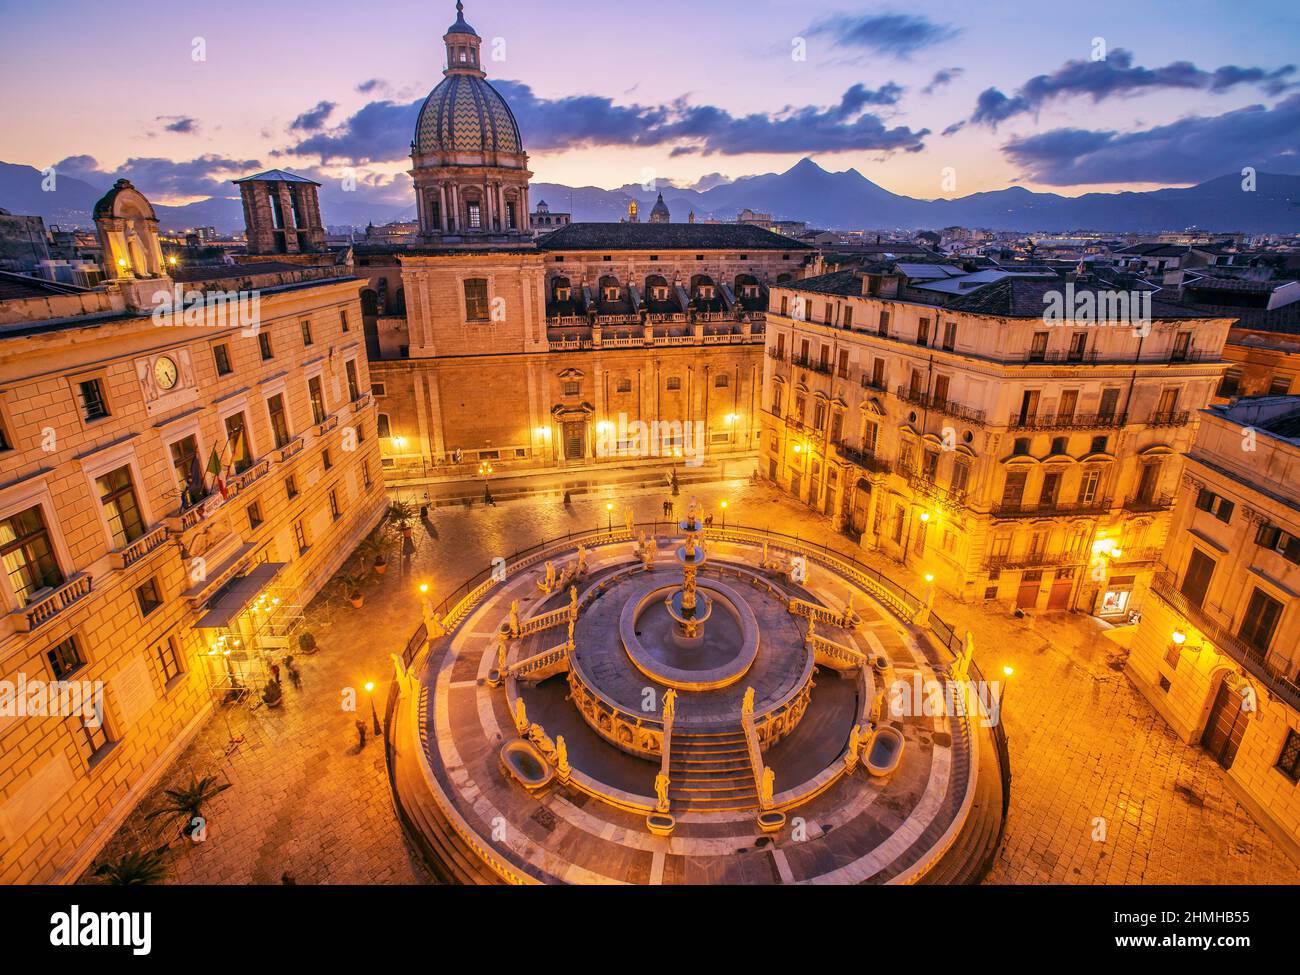 Piazza Pretoria with the Fontana Pretoria and the Church of San Giuseppe dei Teatini in the old town at dusk, Palermo, Sicily, Italy Stock Photo